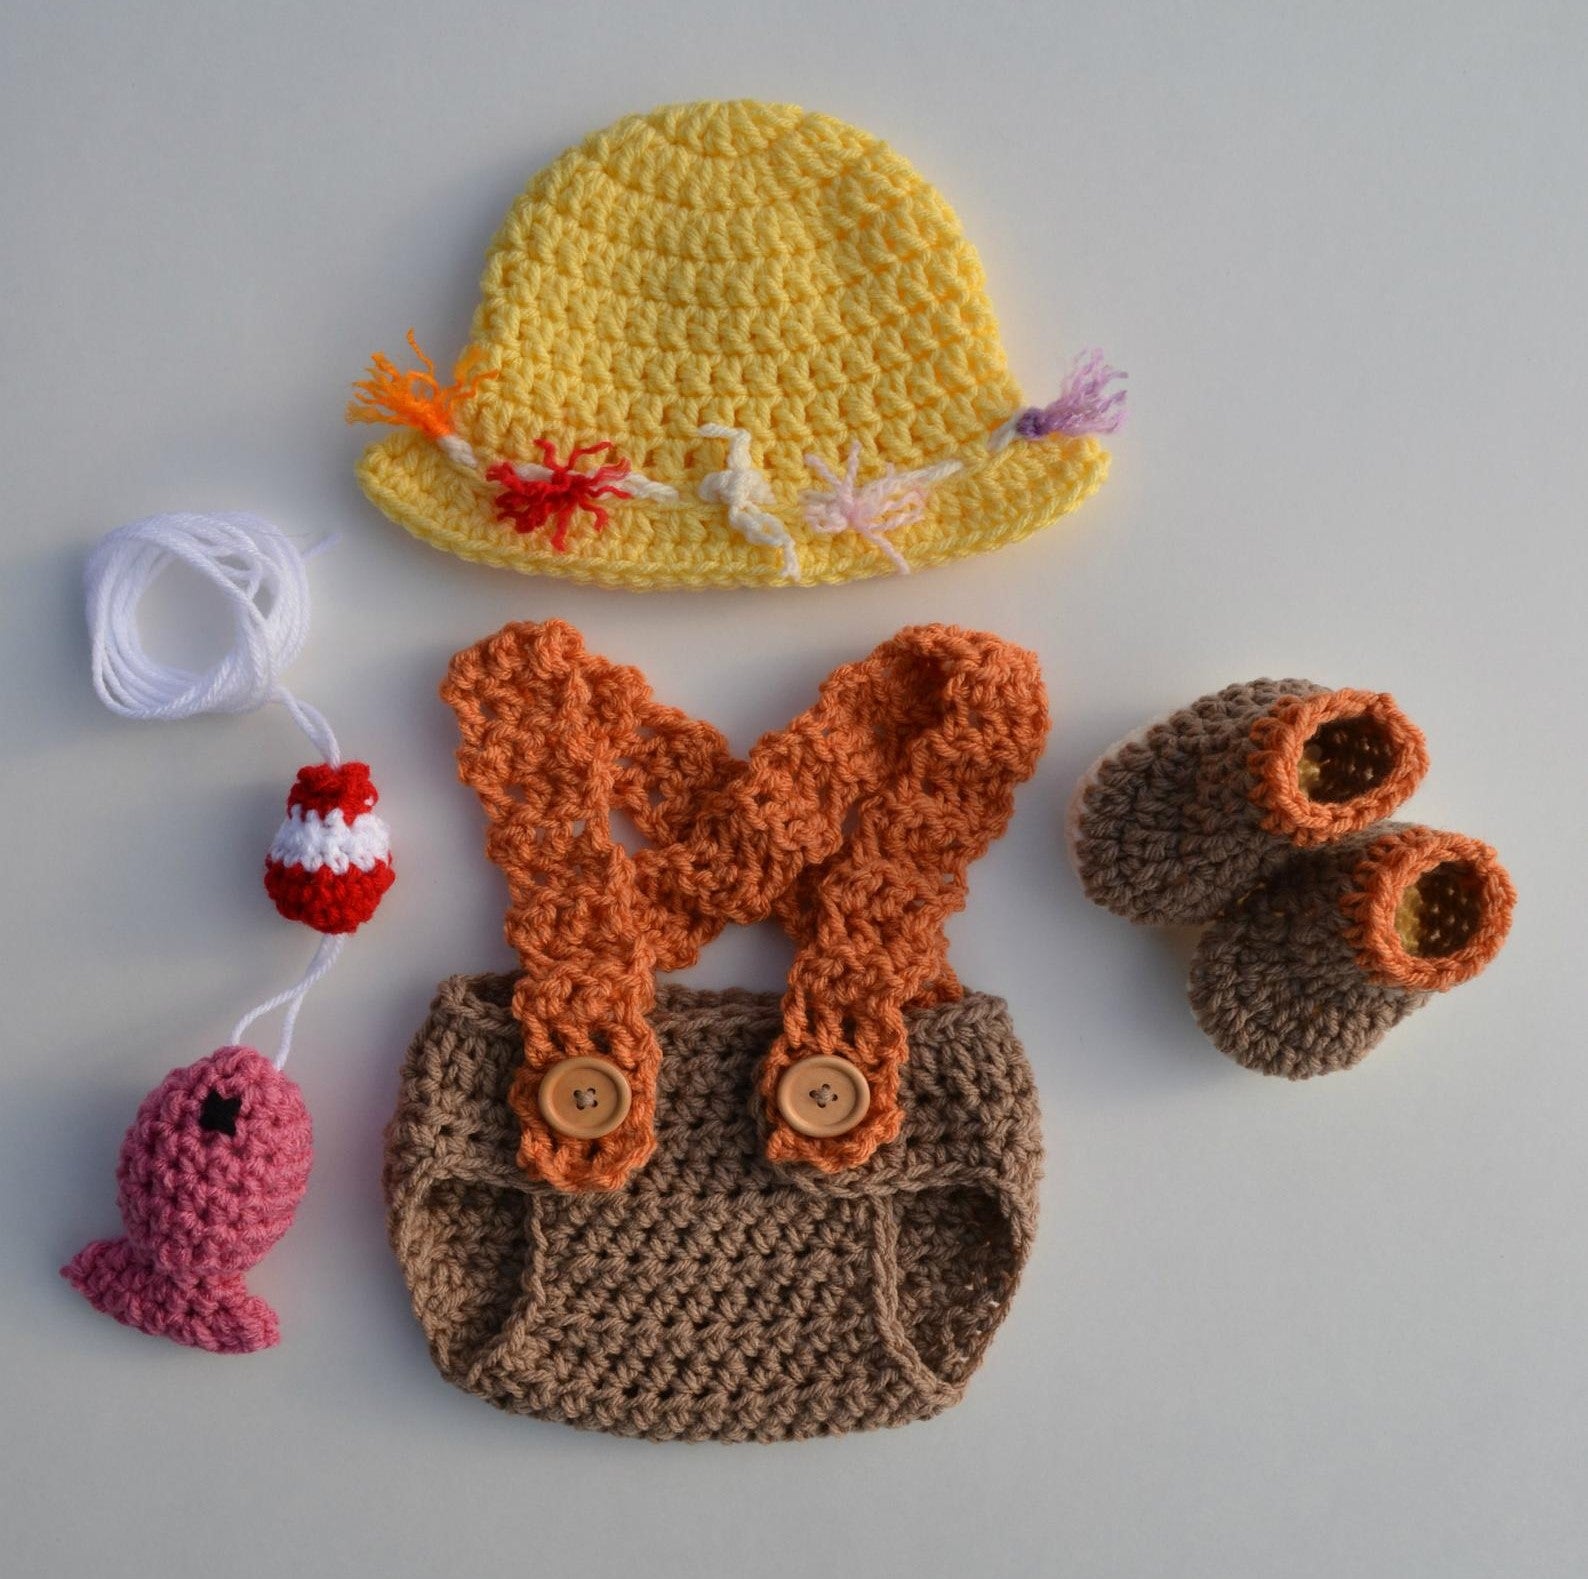 Newborn Fishing Outfit Baby Fishing Outfit Crochet Fishing Outfit